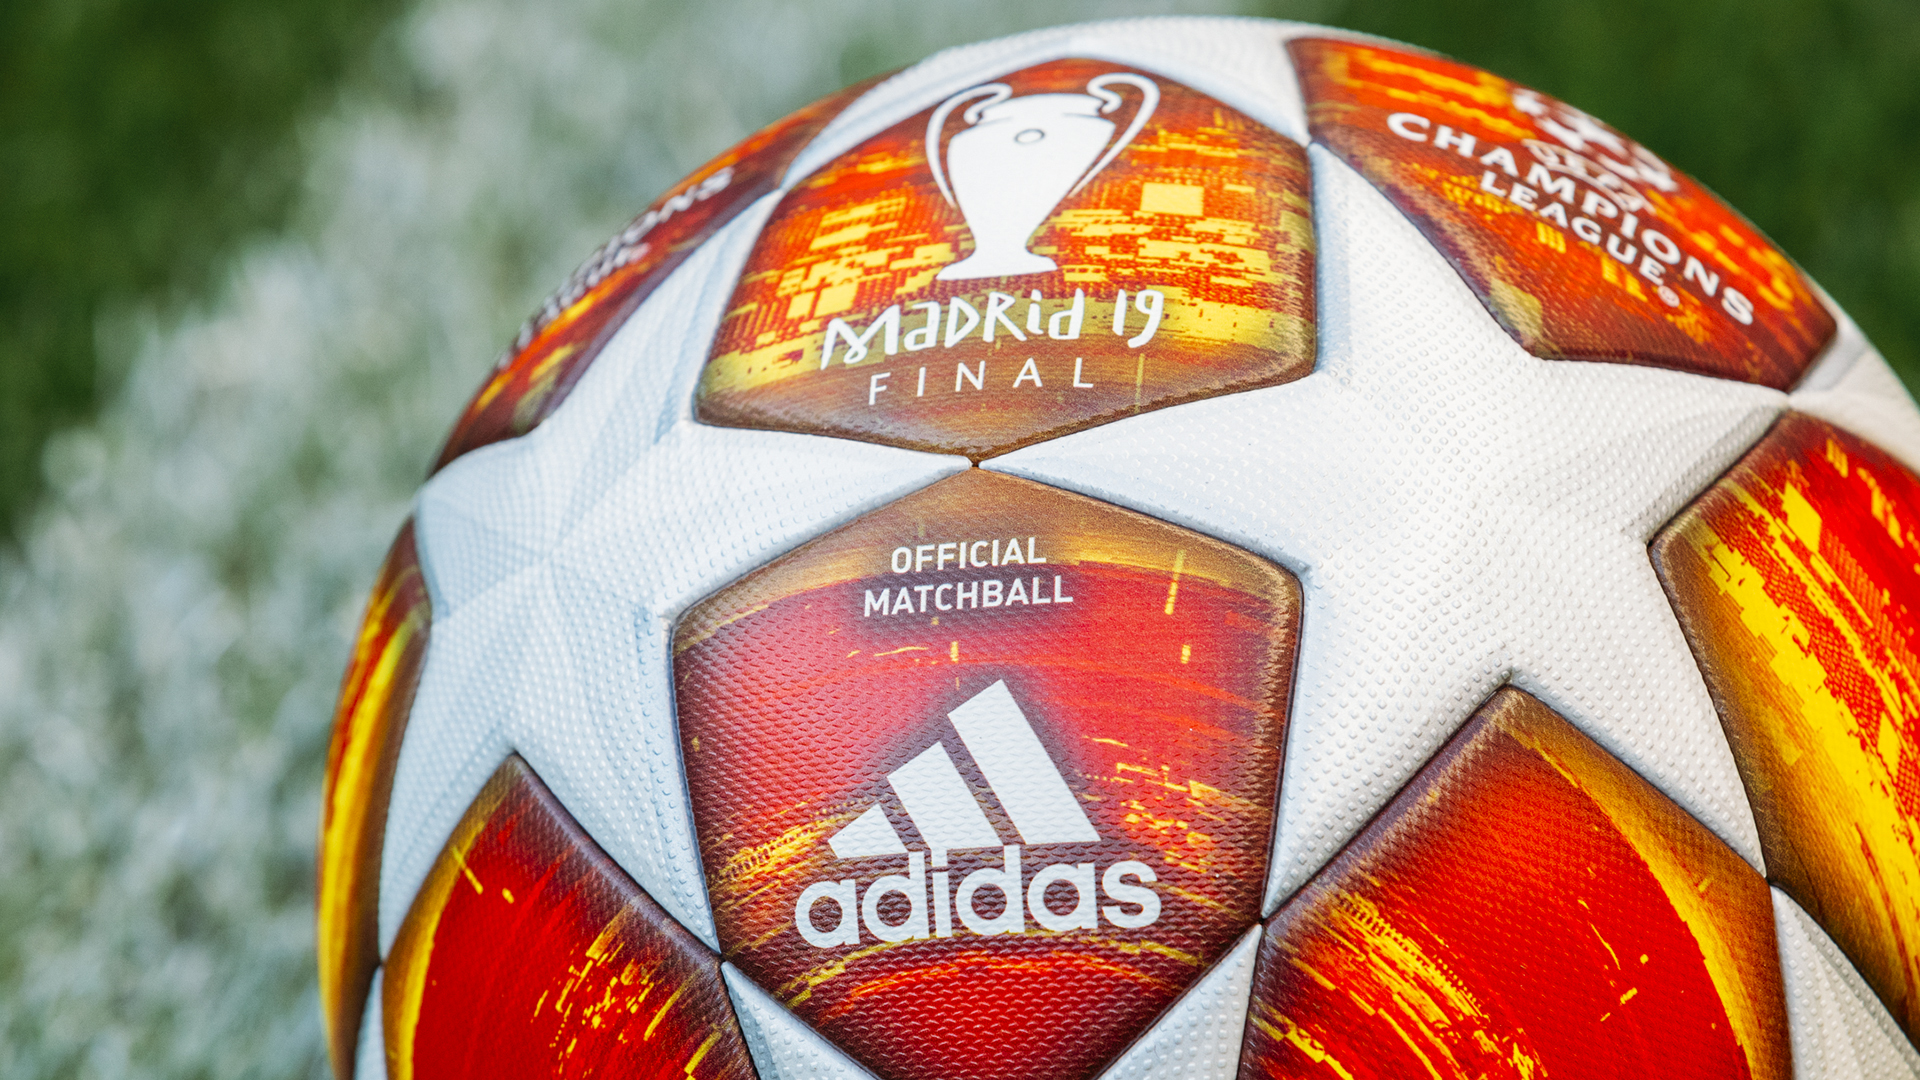 champions league ball 2019 red